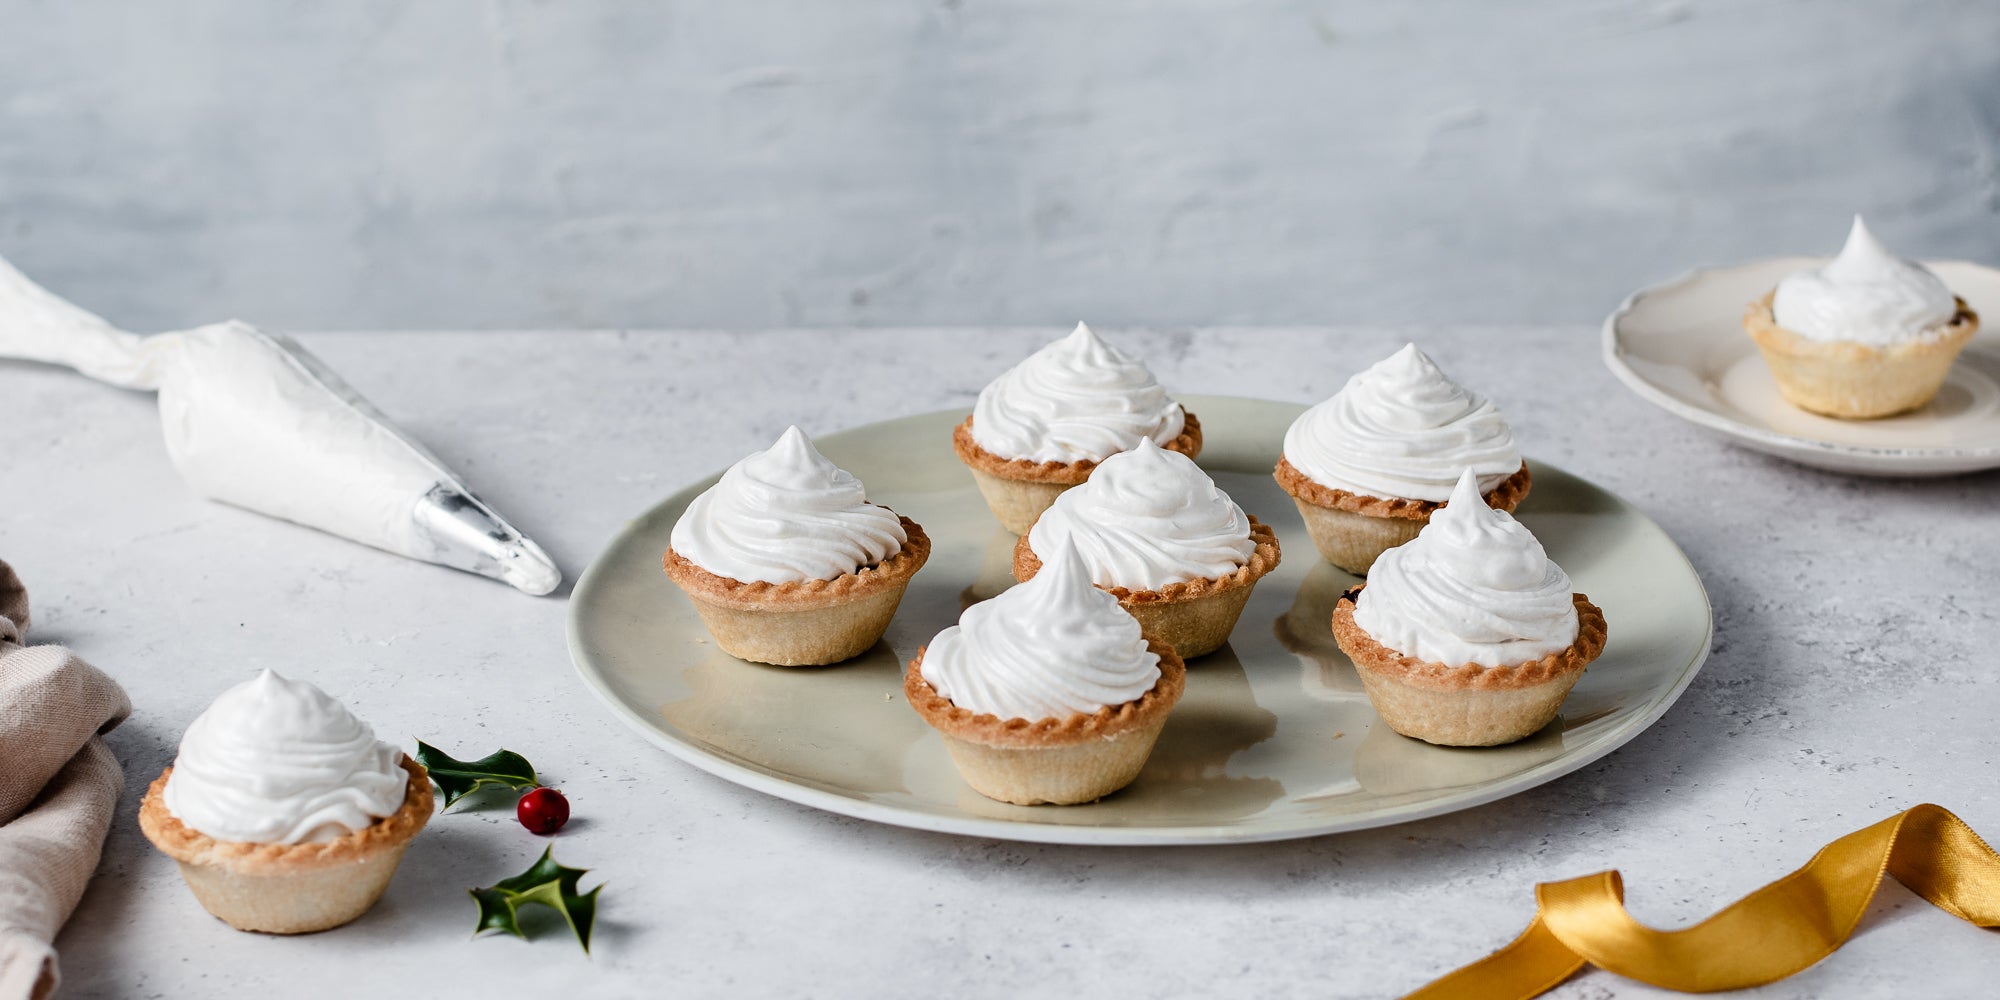 Meringue Topped Mince Pies on a serving plate next to a piping bag of meringue